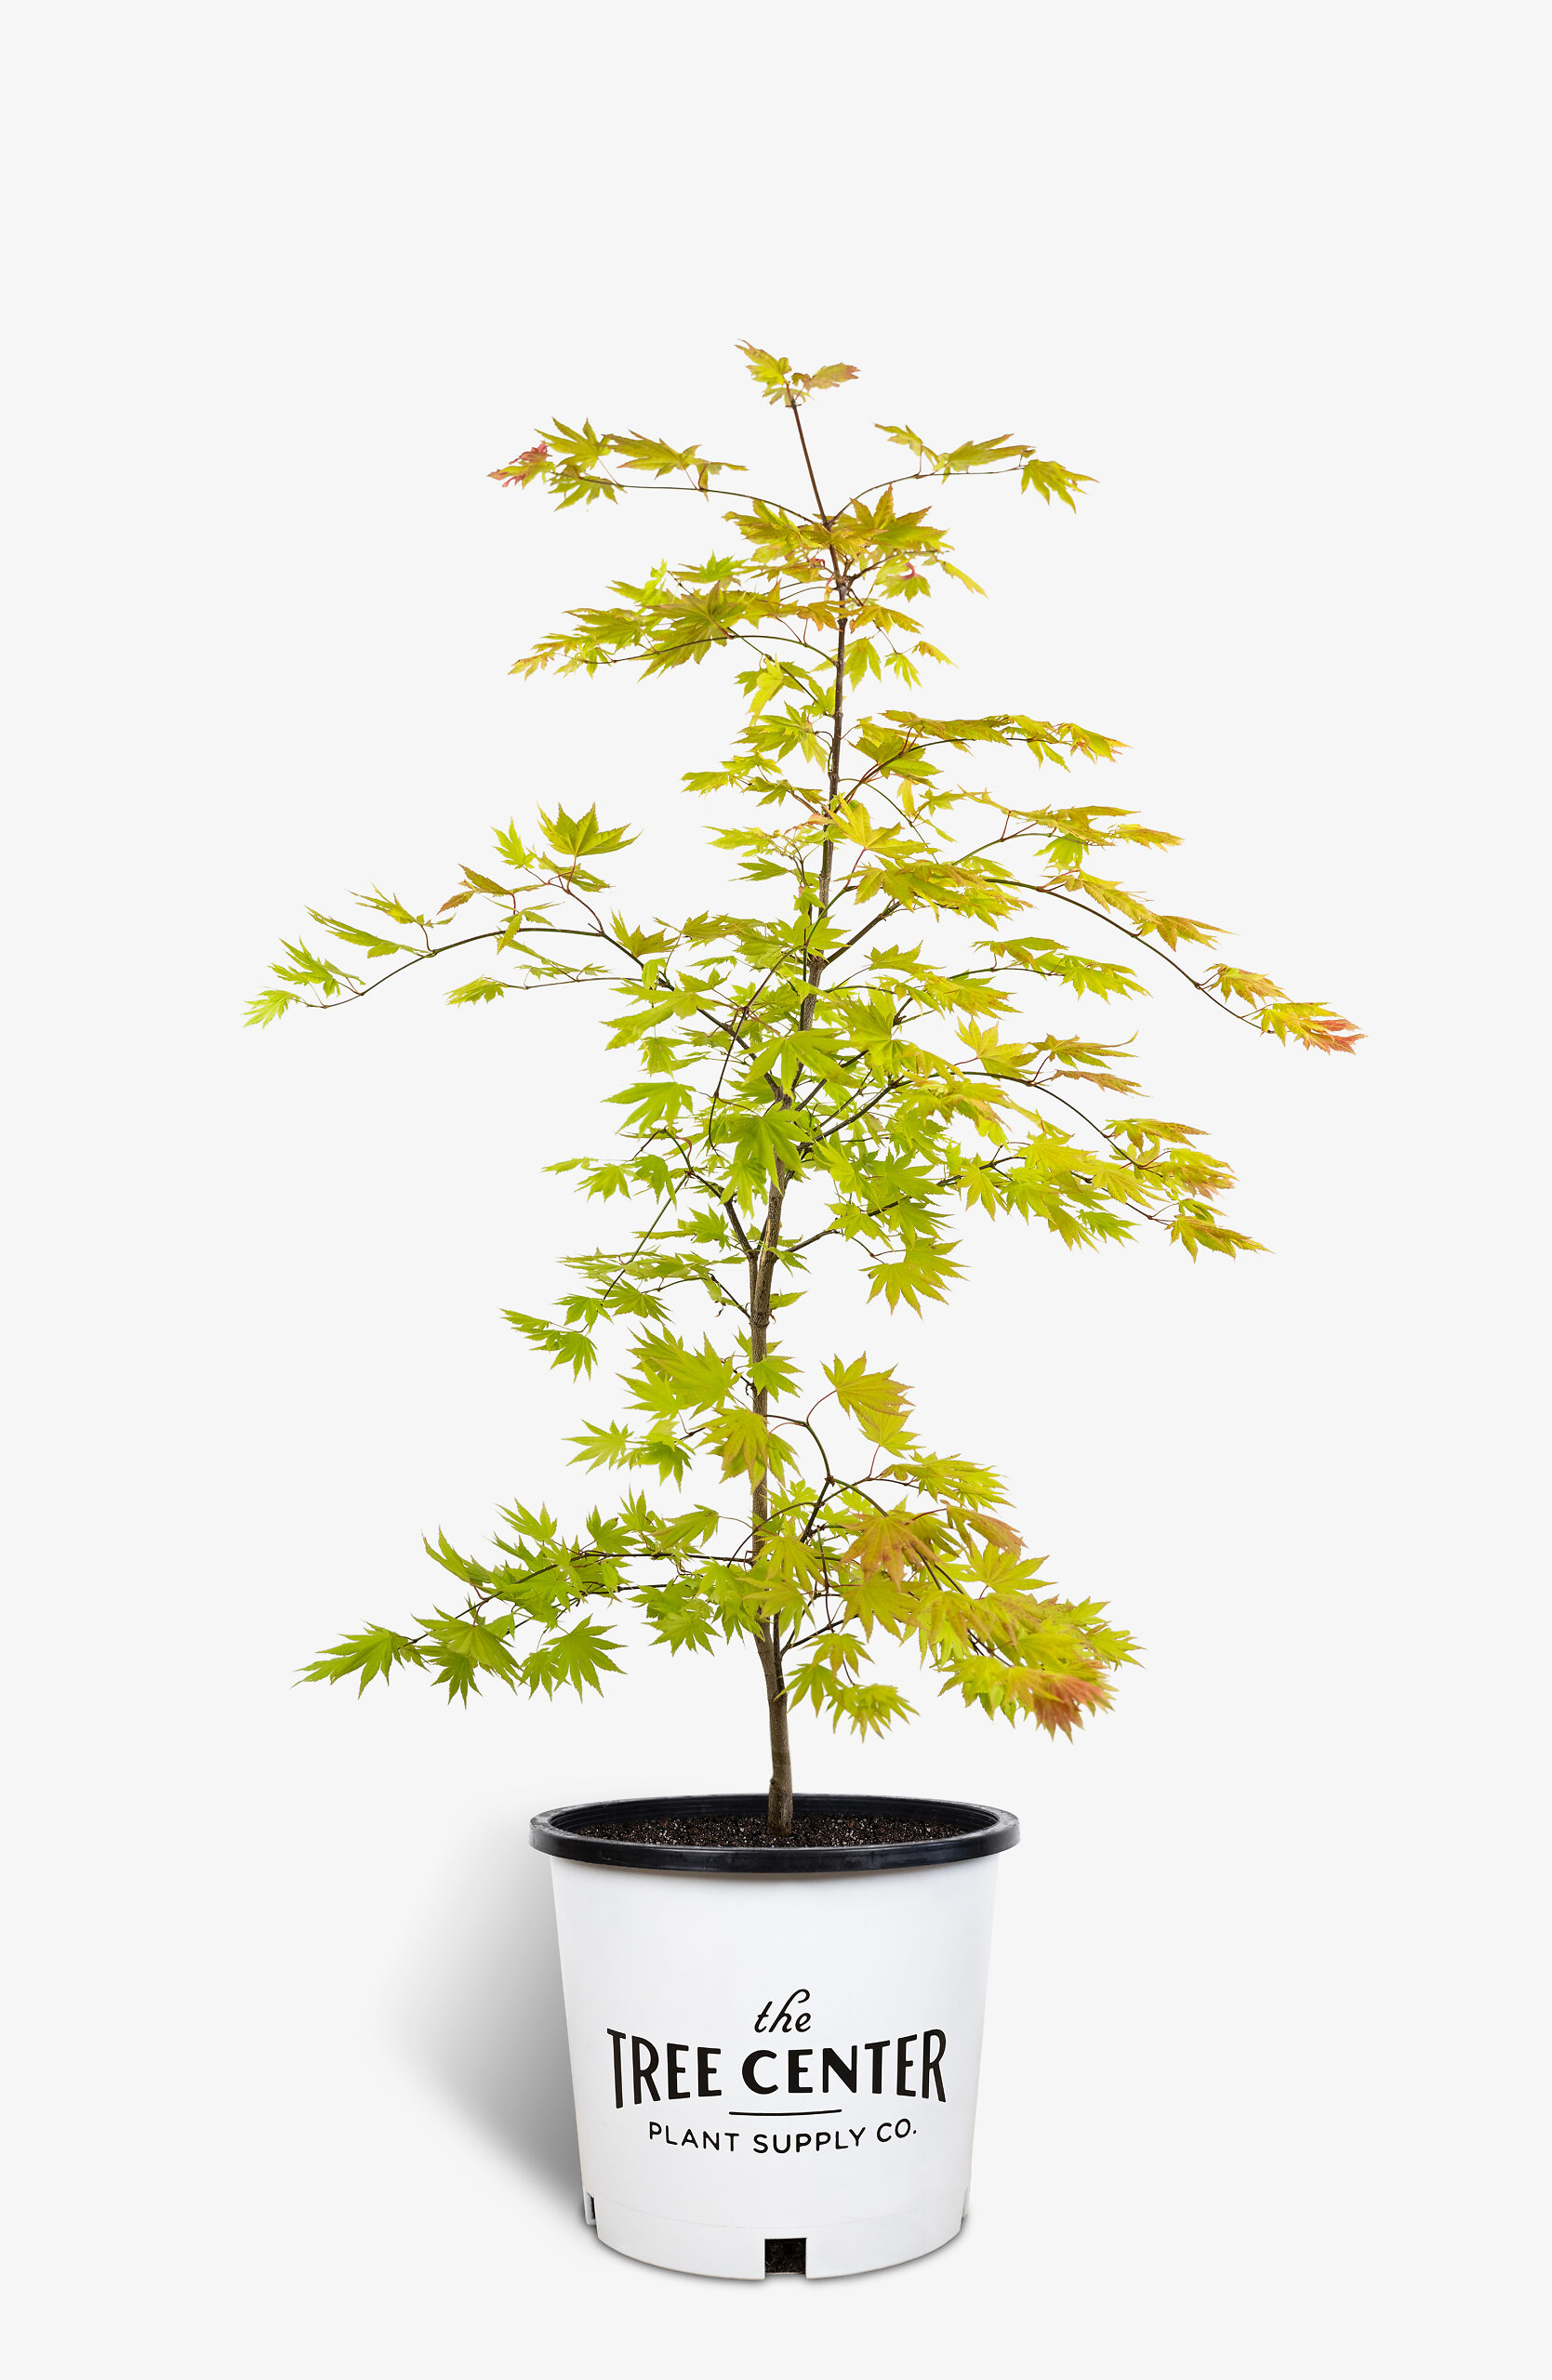 Buy Autumn Moon Japanese Maple For Sale The Tree Center